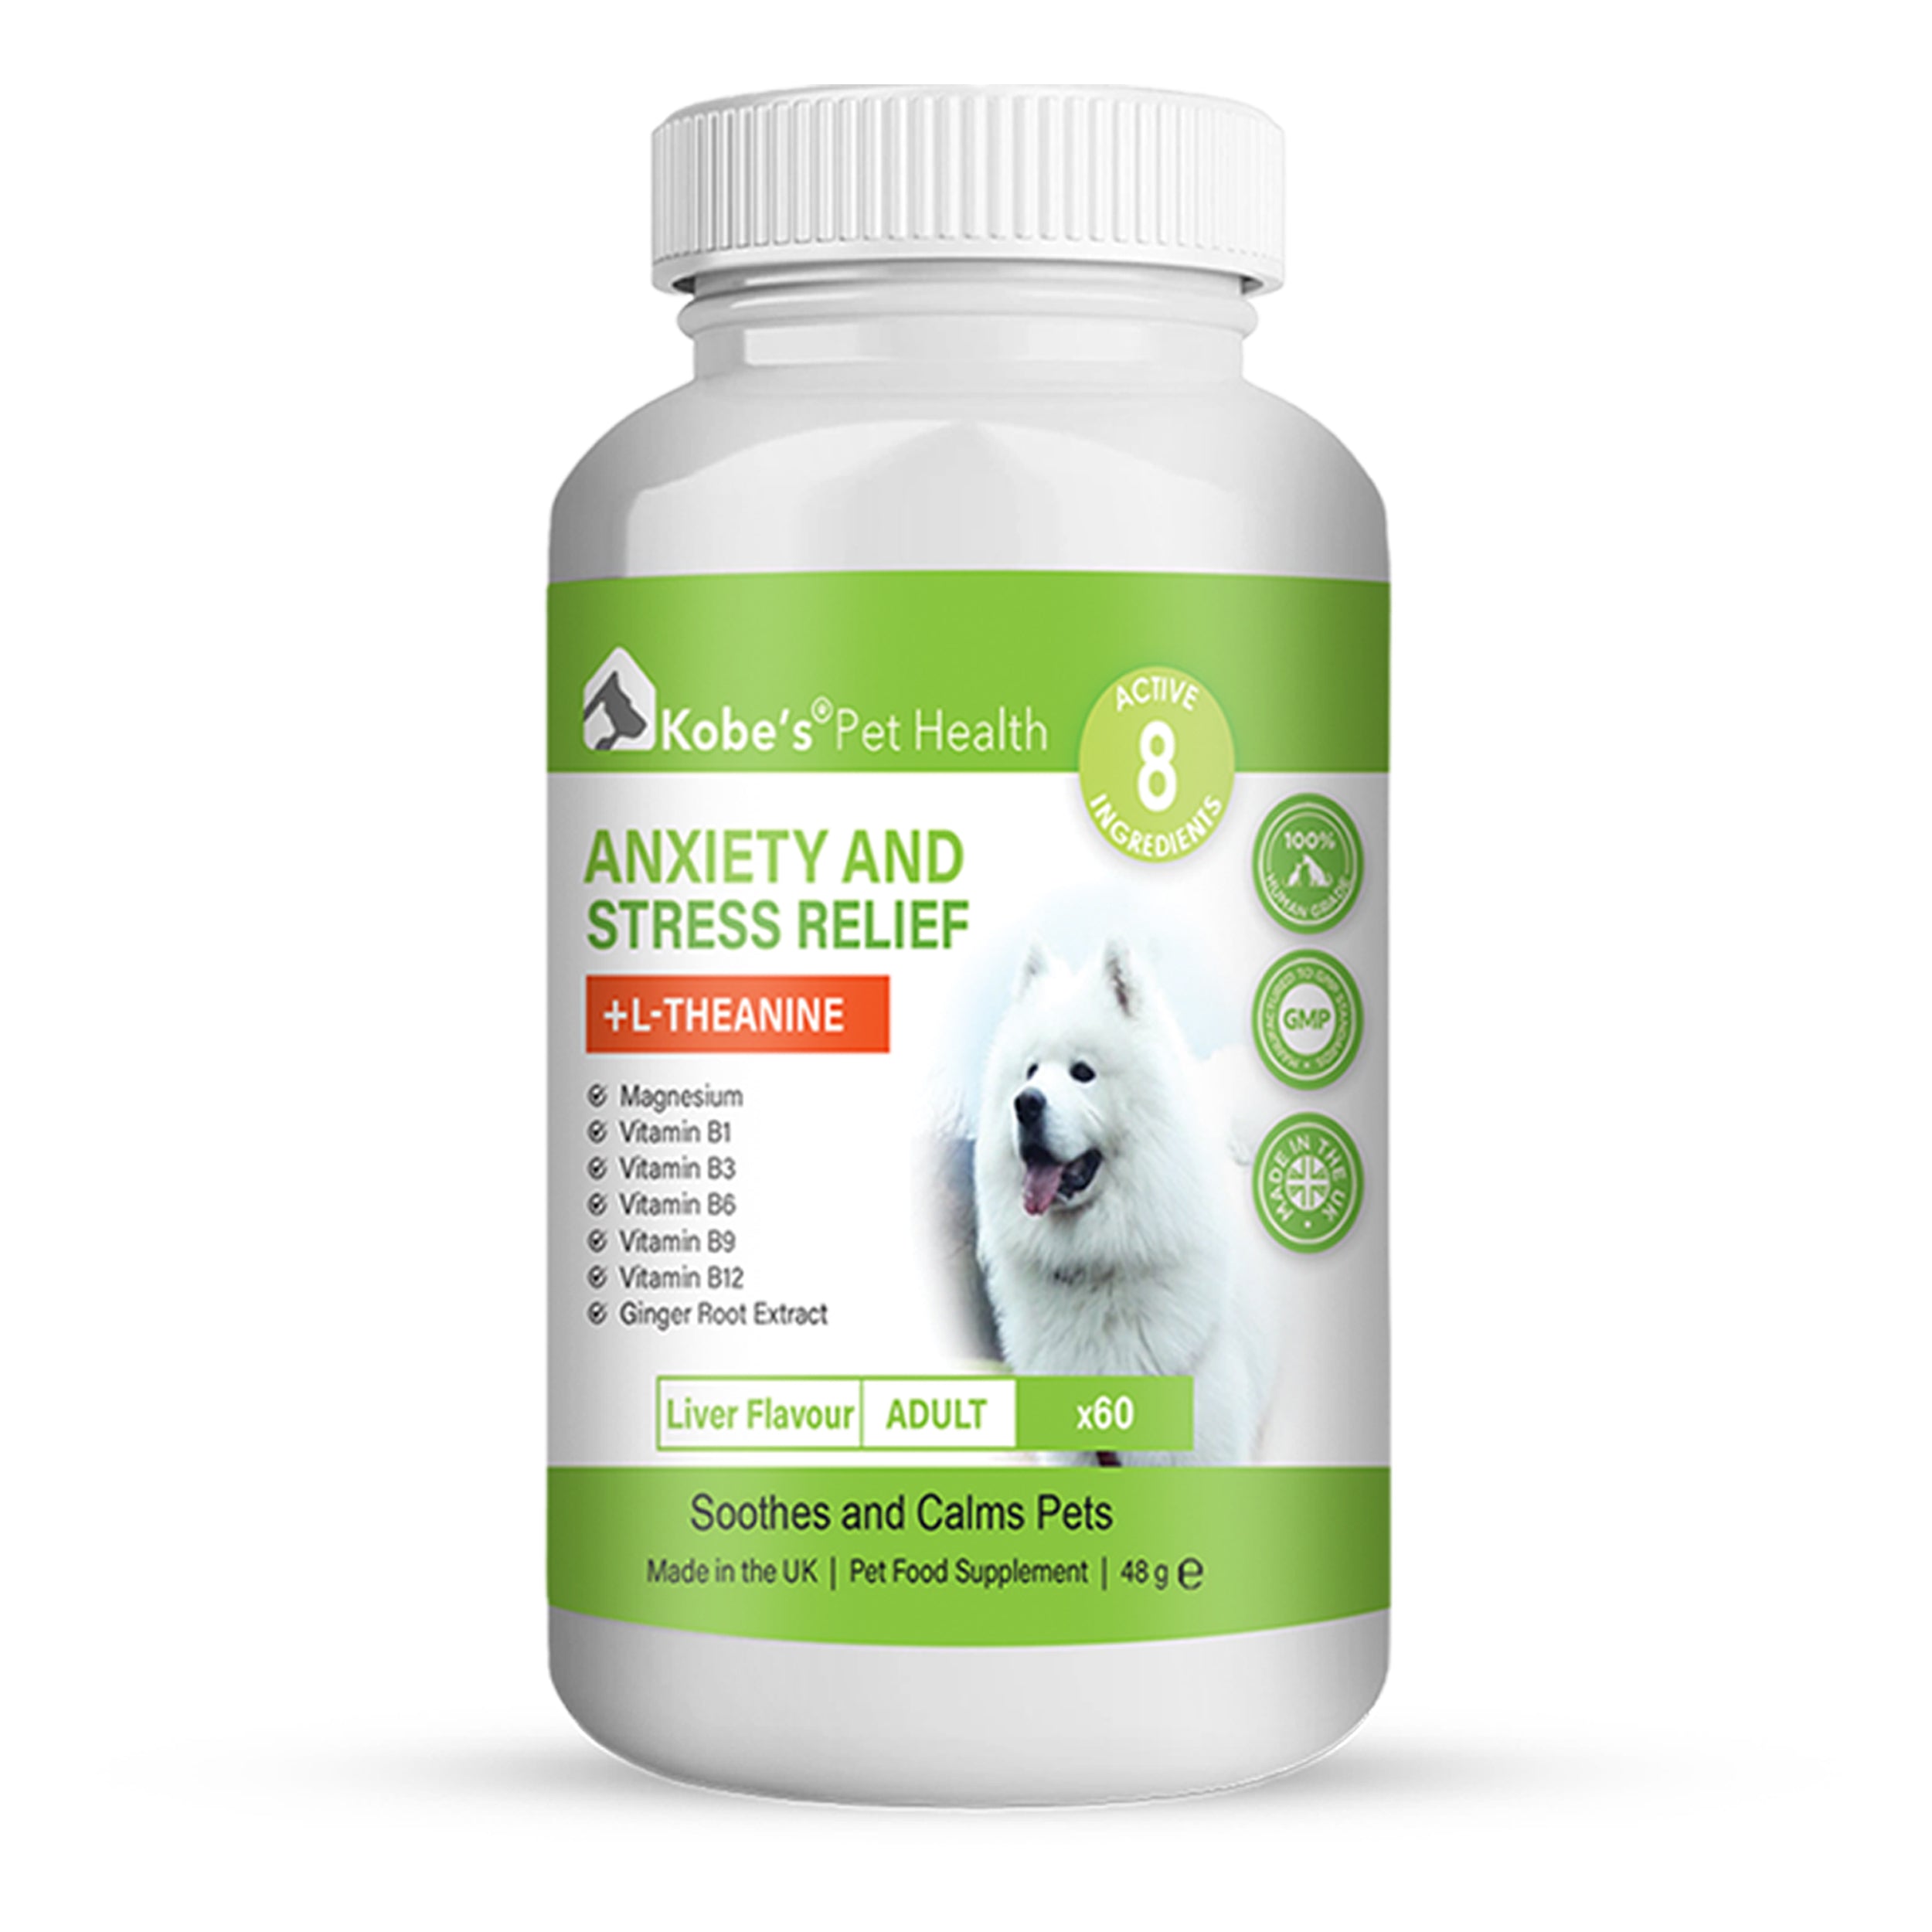 Natural calming pills for dogs | Calming aids for hyper dogs | Anxiety and stress relief - 60 Capsules (Final)